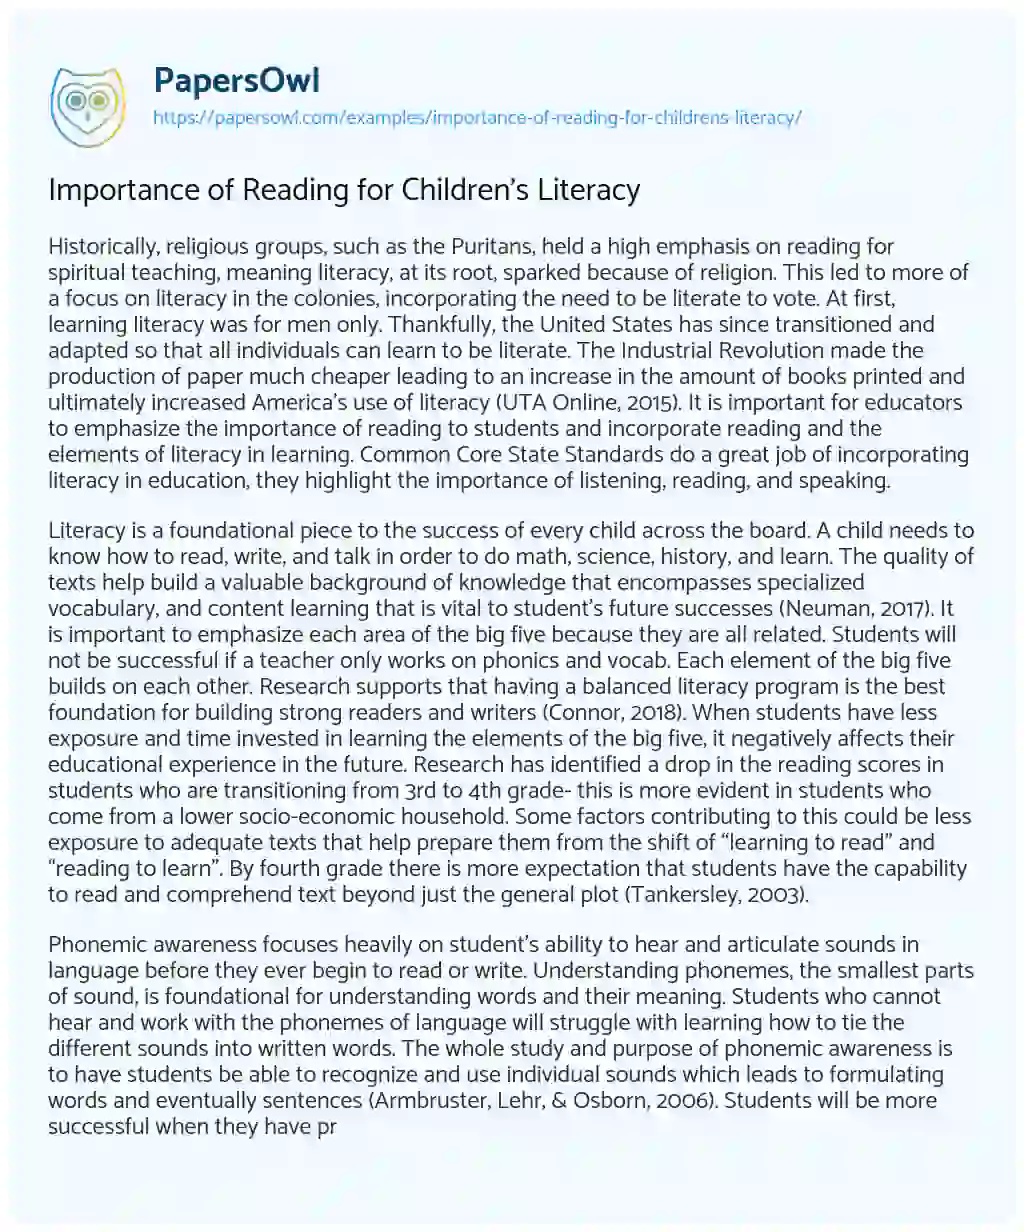 Essay on Importance of Reading for Children’s Literacy